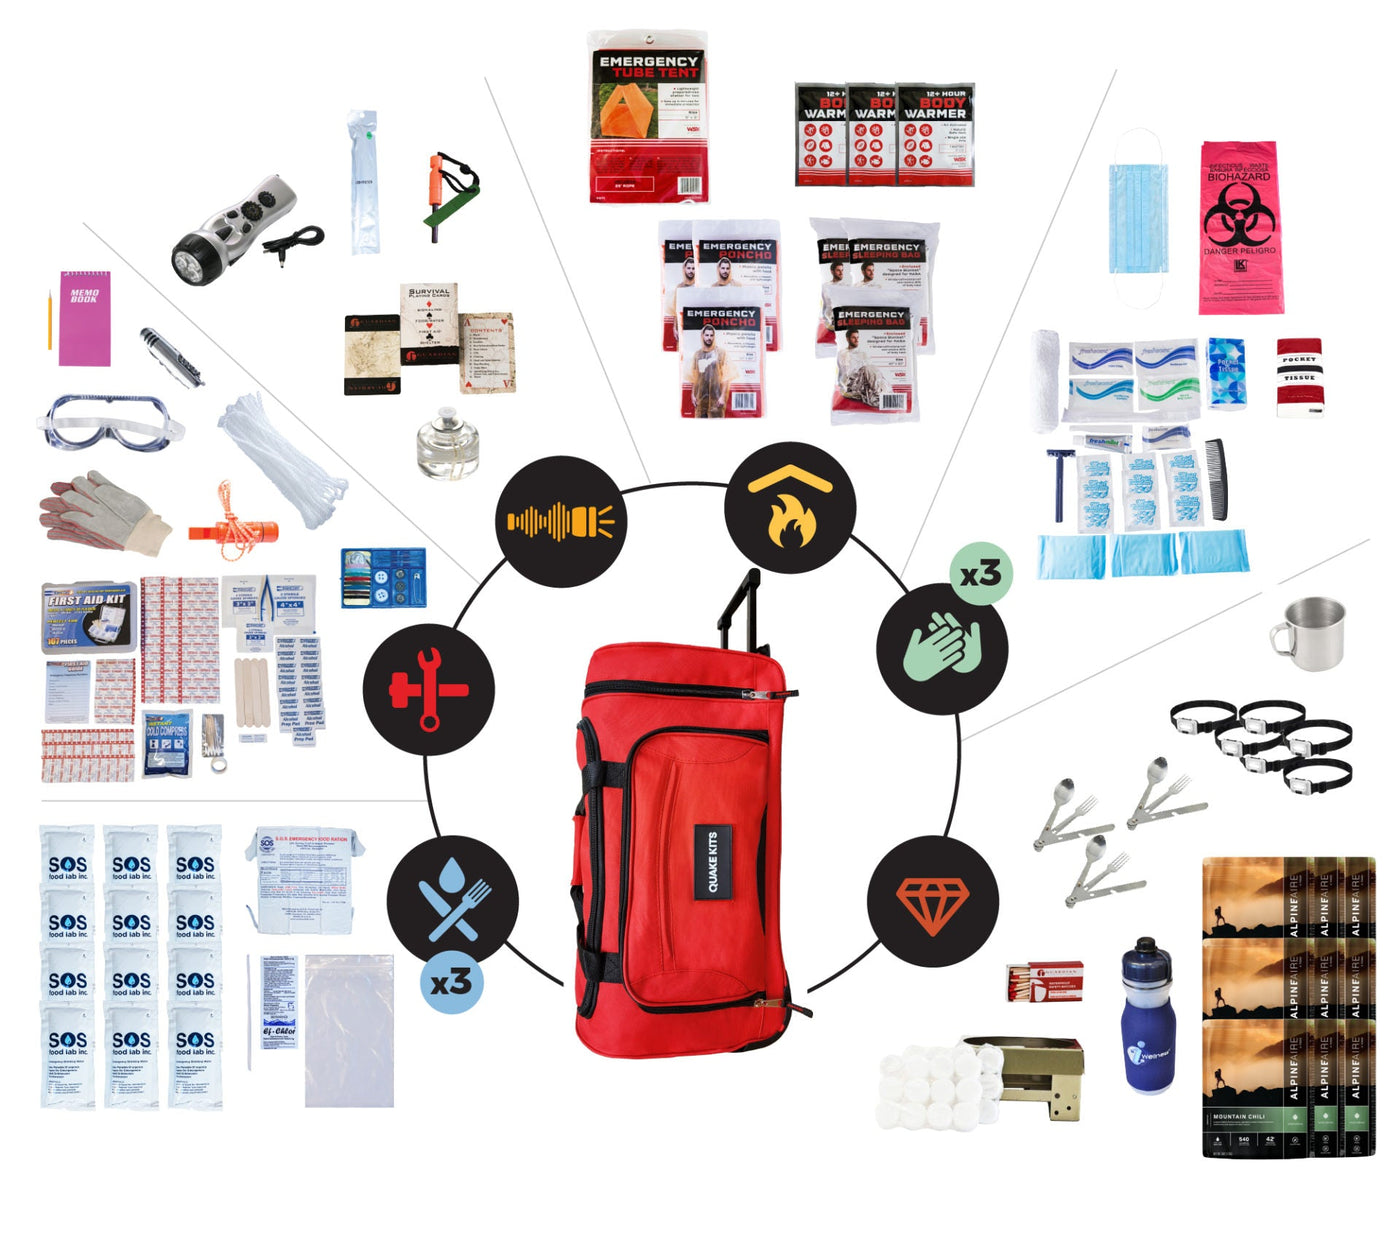 Extensively Prepared Emergency Kit - 3 Person / 72 Hours